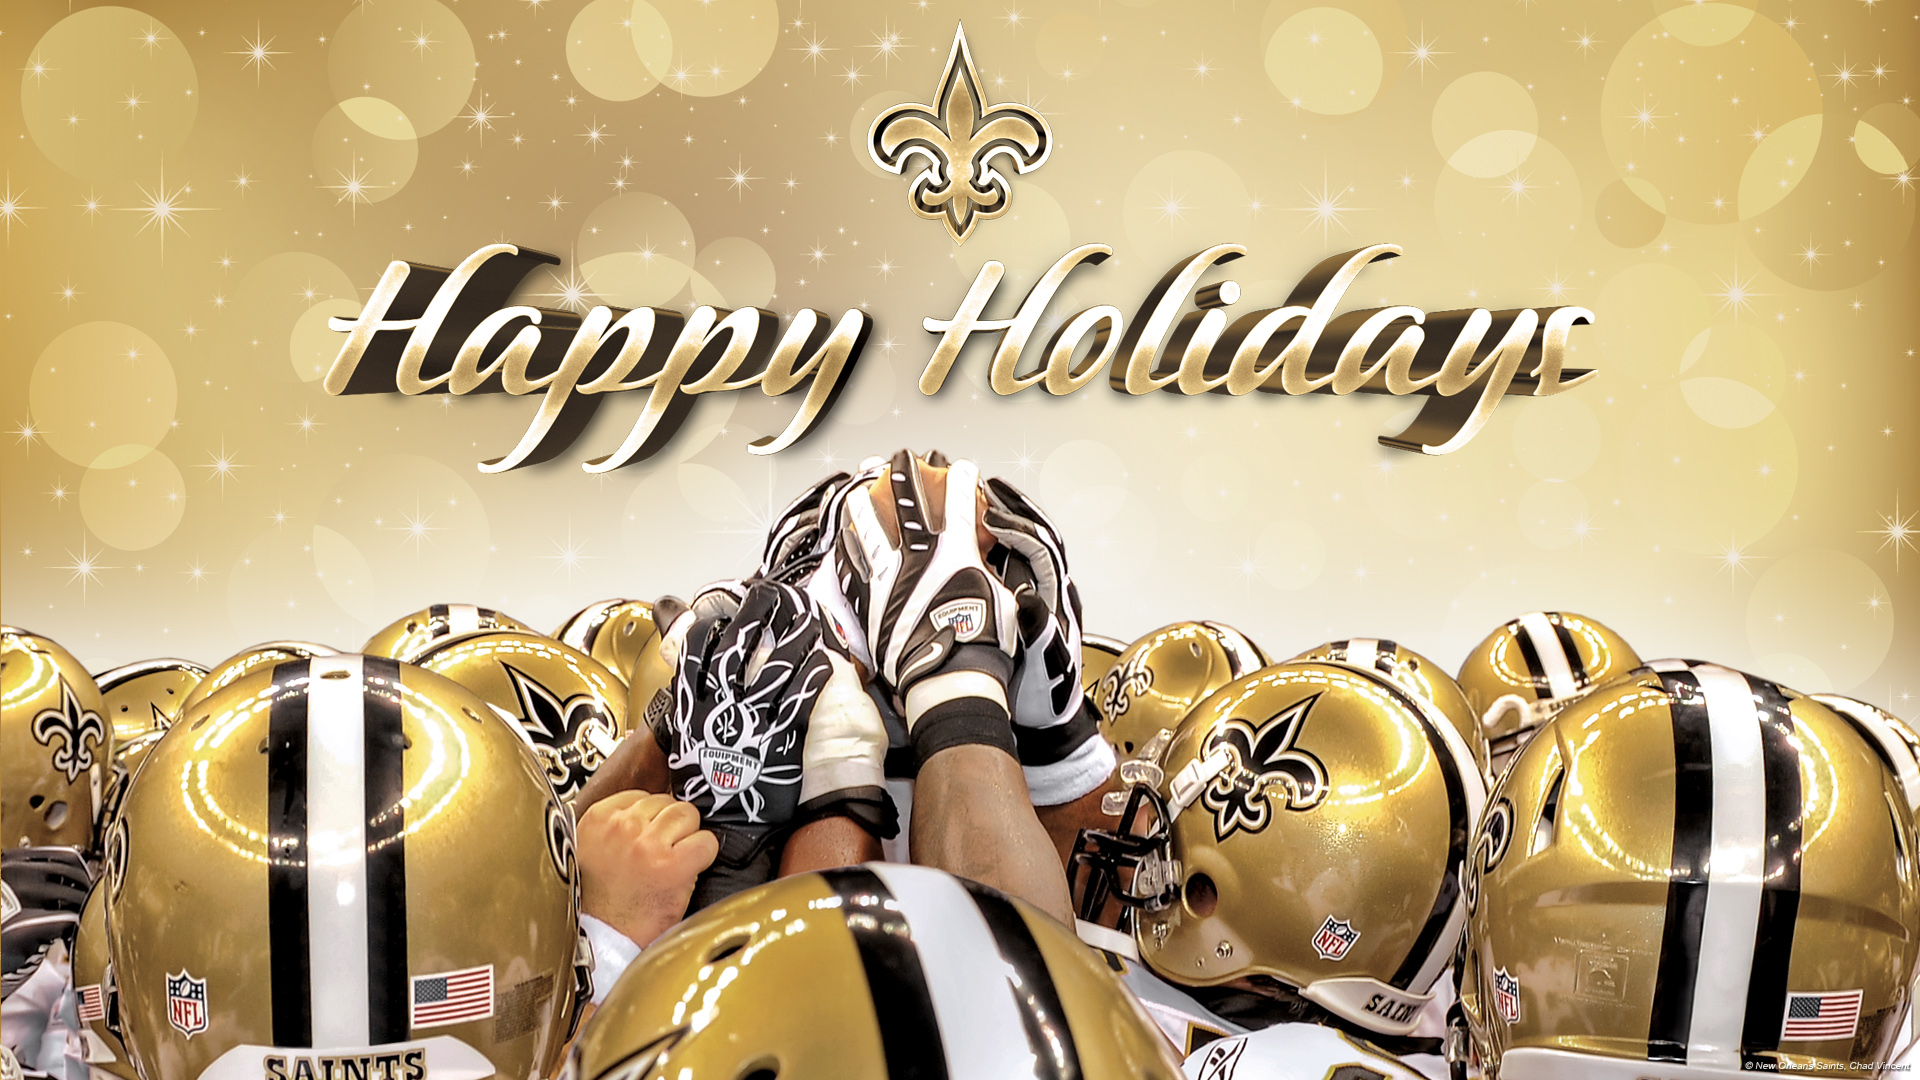 new, Orleans, Saints, Nfl, Football, Christmas, New, Year, Holiday Wallpaper